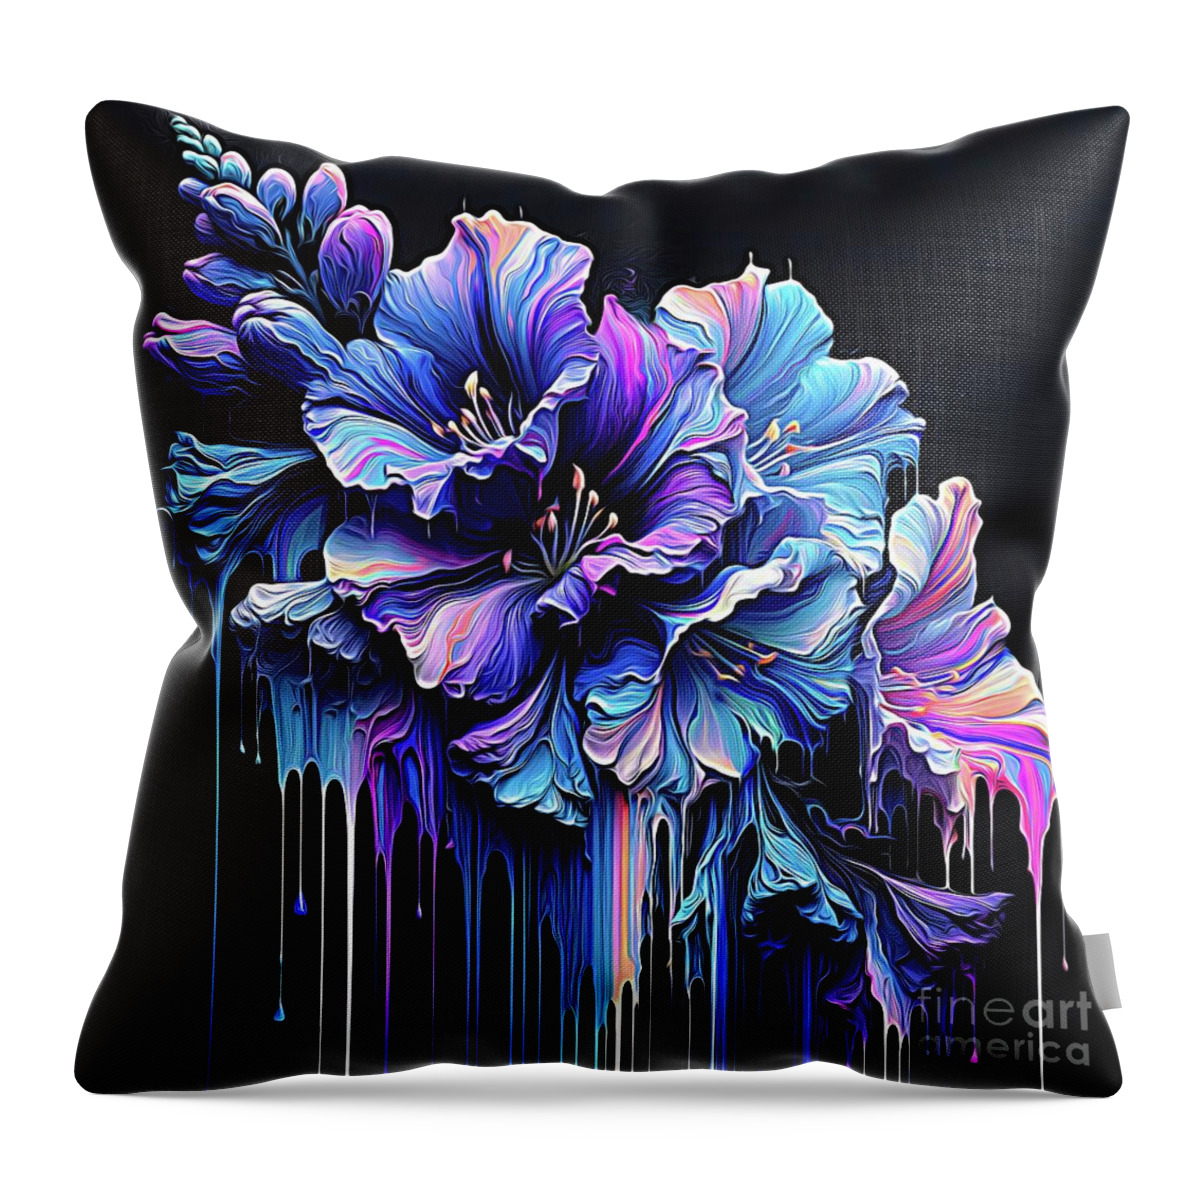 Larkspur Flower On Black With Paint Drip And Expressionist Effects Throw Pillow featuring the digital art Larkspur Flower on Black With Paint Drip and Expressionist Effects by Rose Santuci-Sofranko